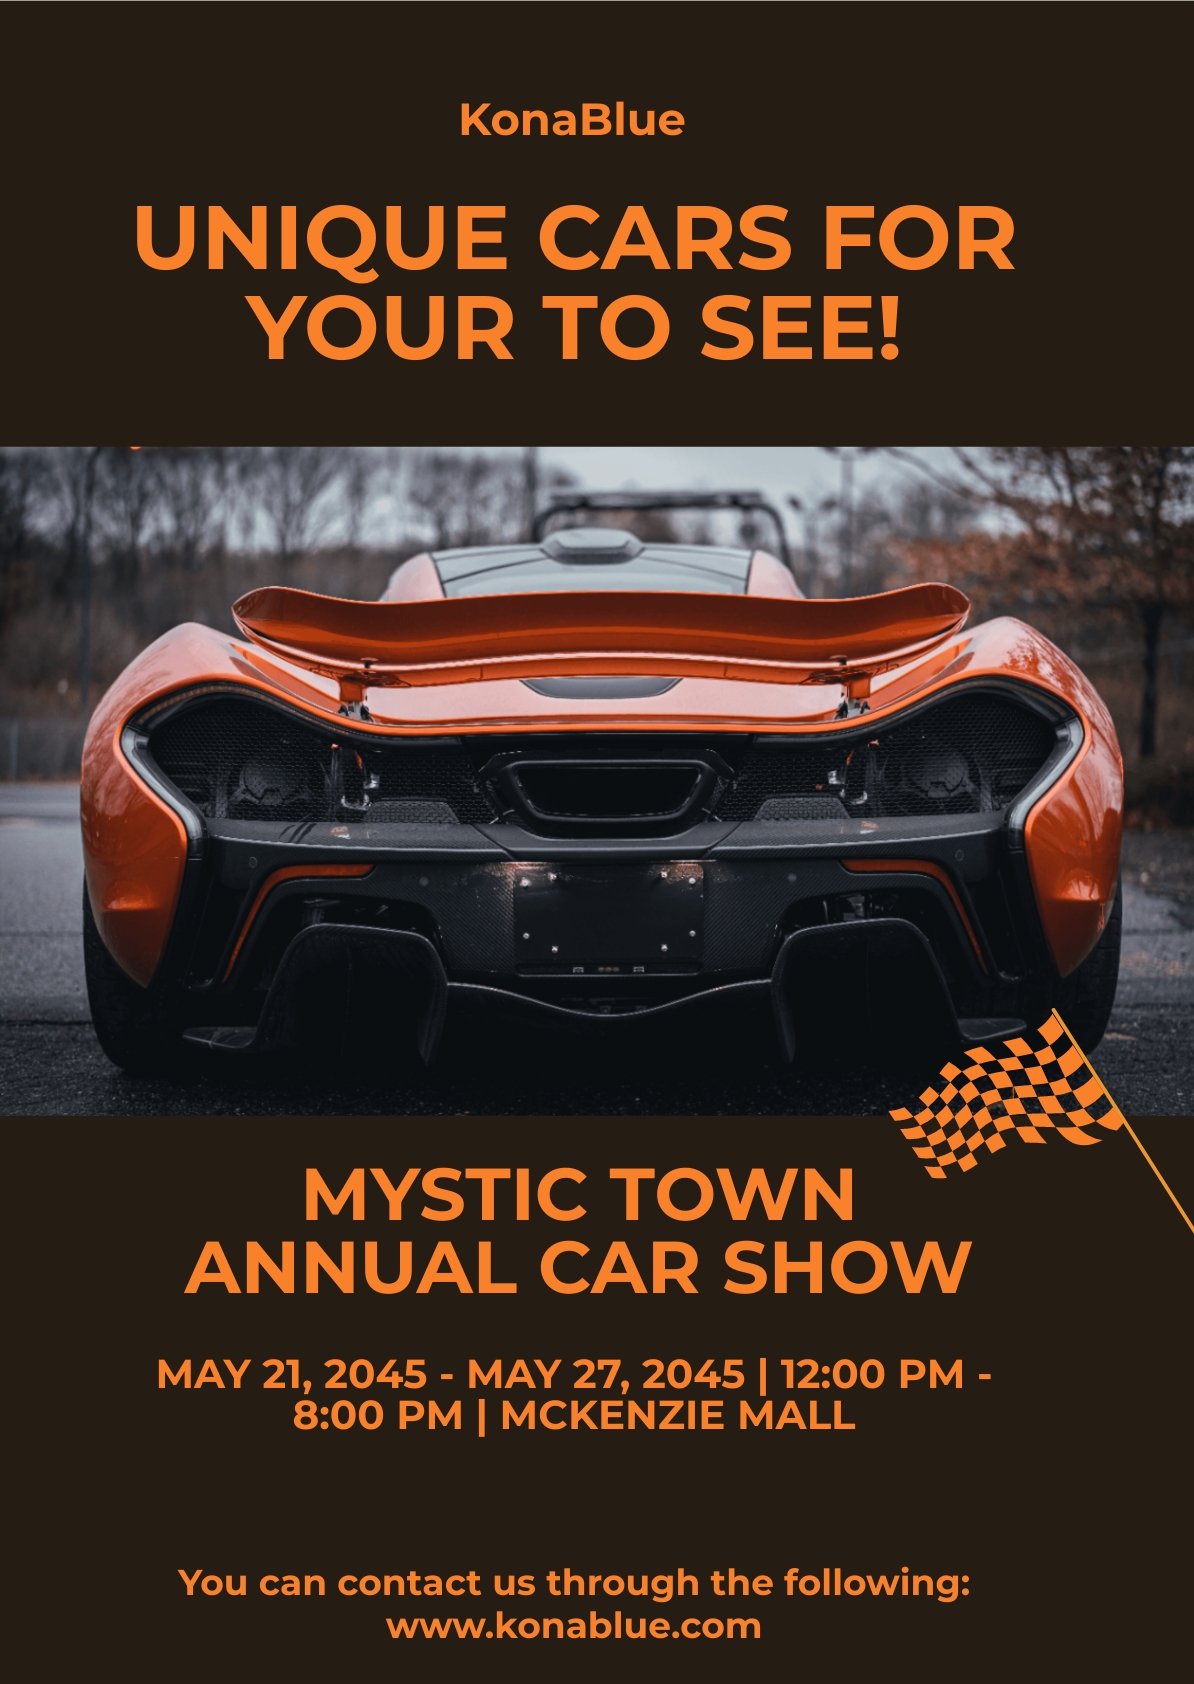 Free Exotic Car Show Flyer in Word, Google Docs, Illustrator, PSD, Apple Pages, Publisher